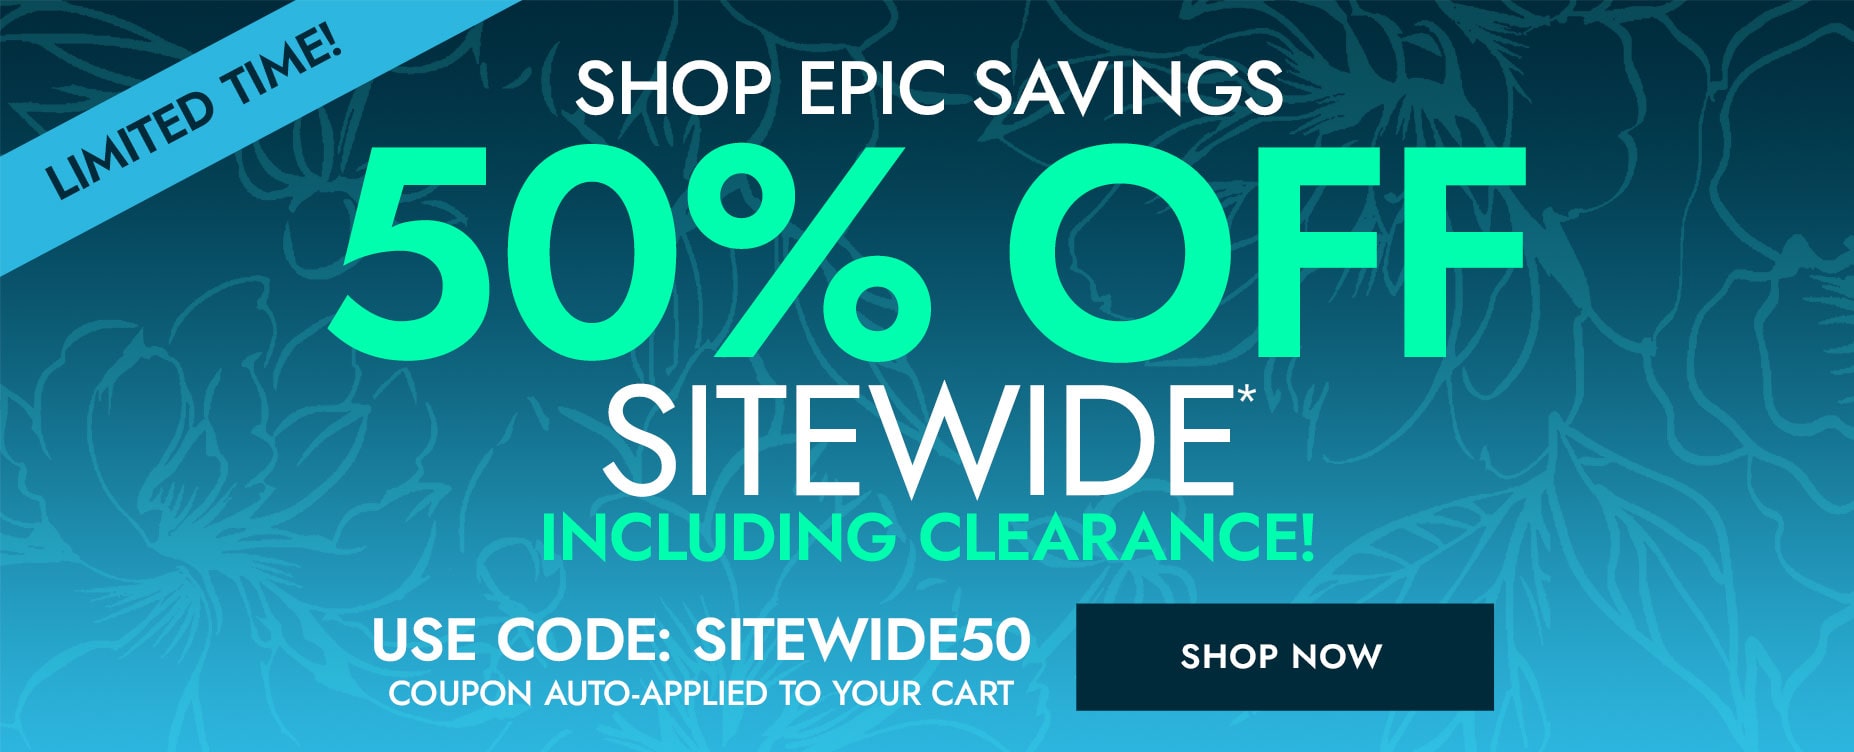 Limited time! 50% Off Sitewide including clearance! Use Code: SITEWIDE50 